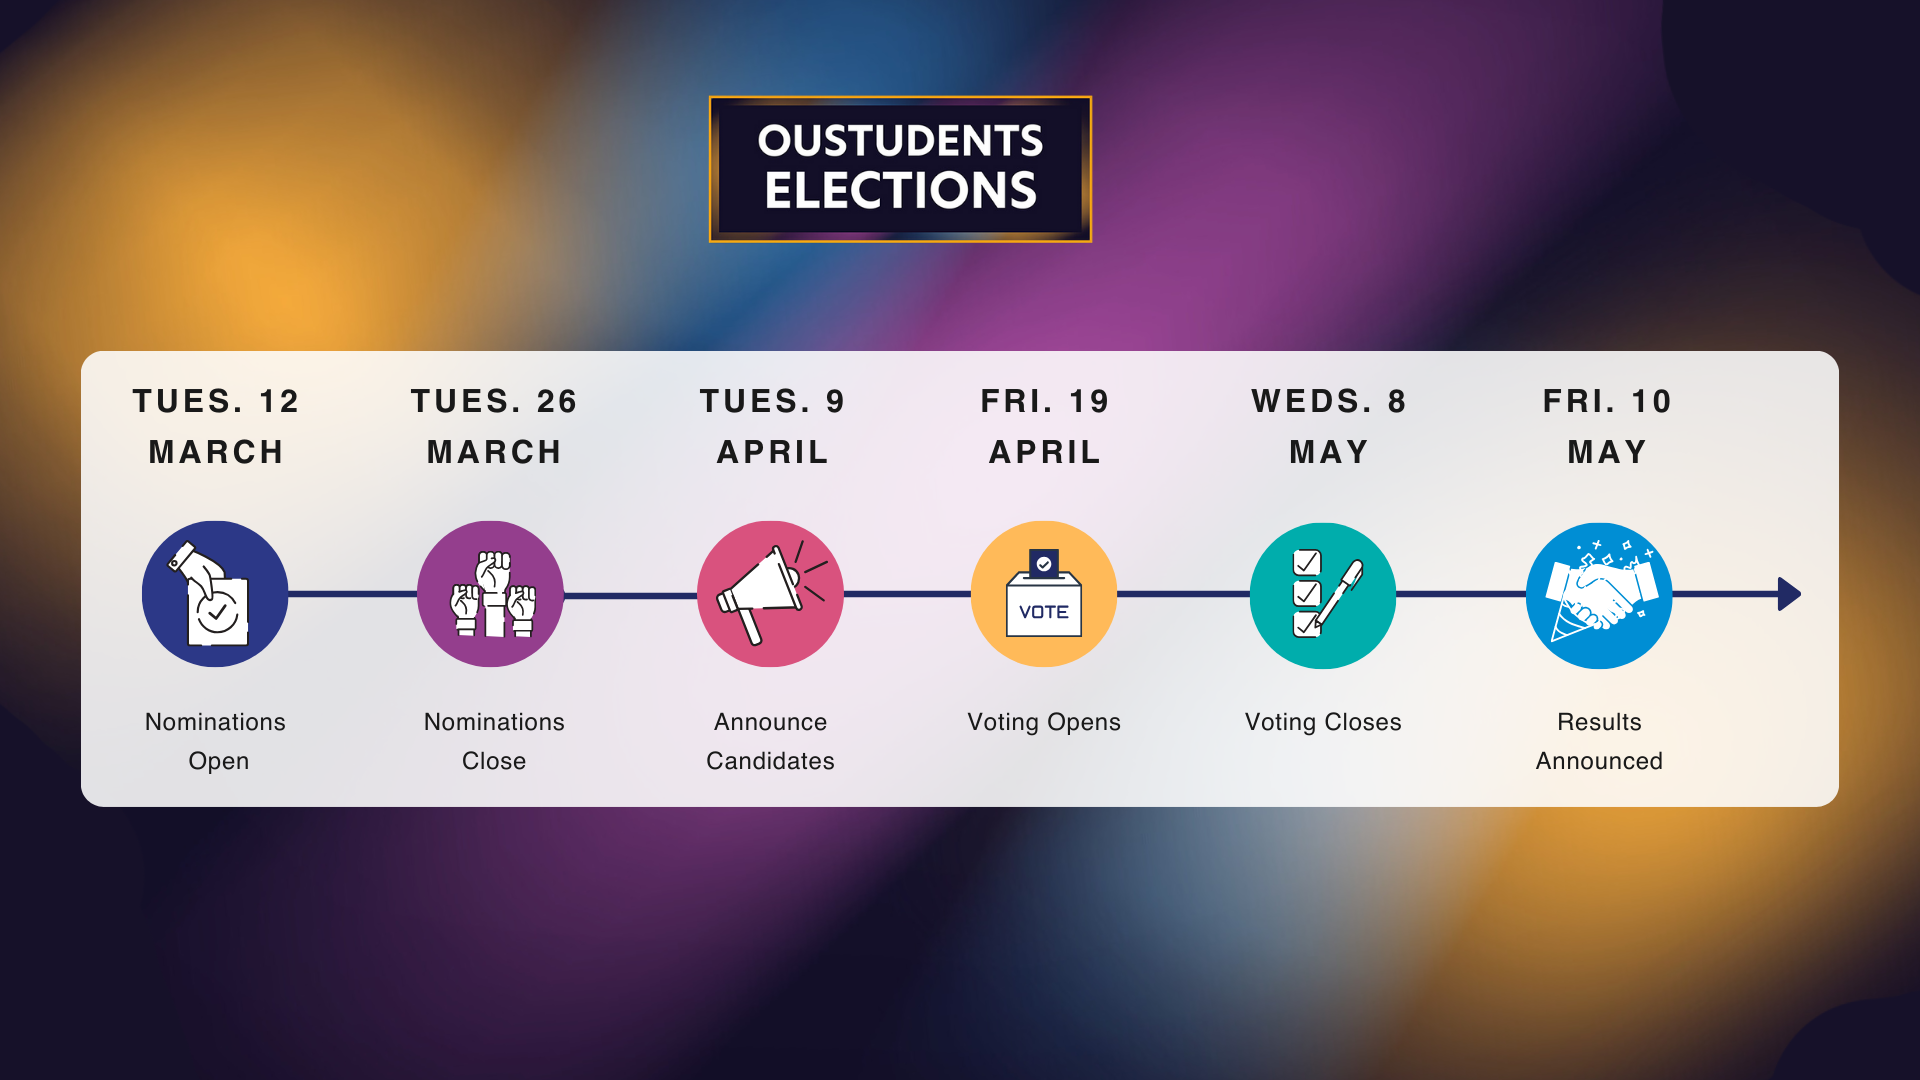 Election timeline graphic. See below for written timeline.